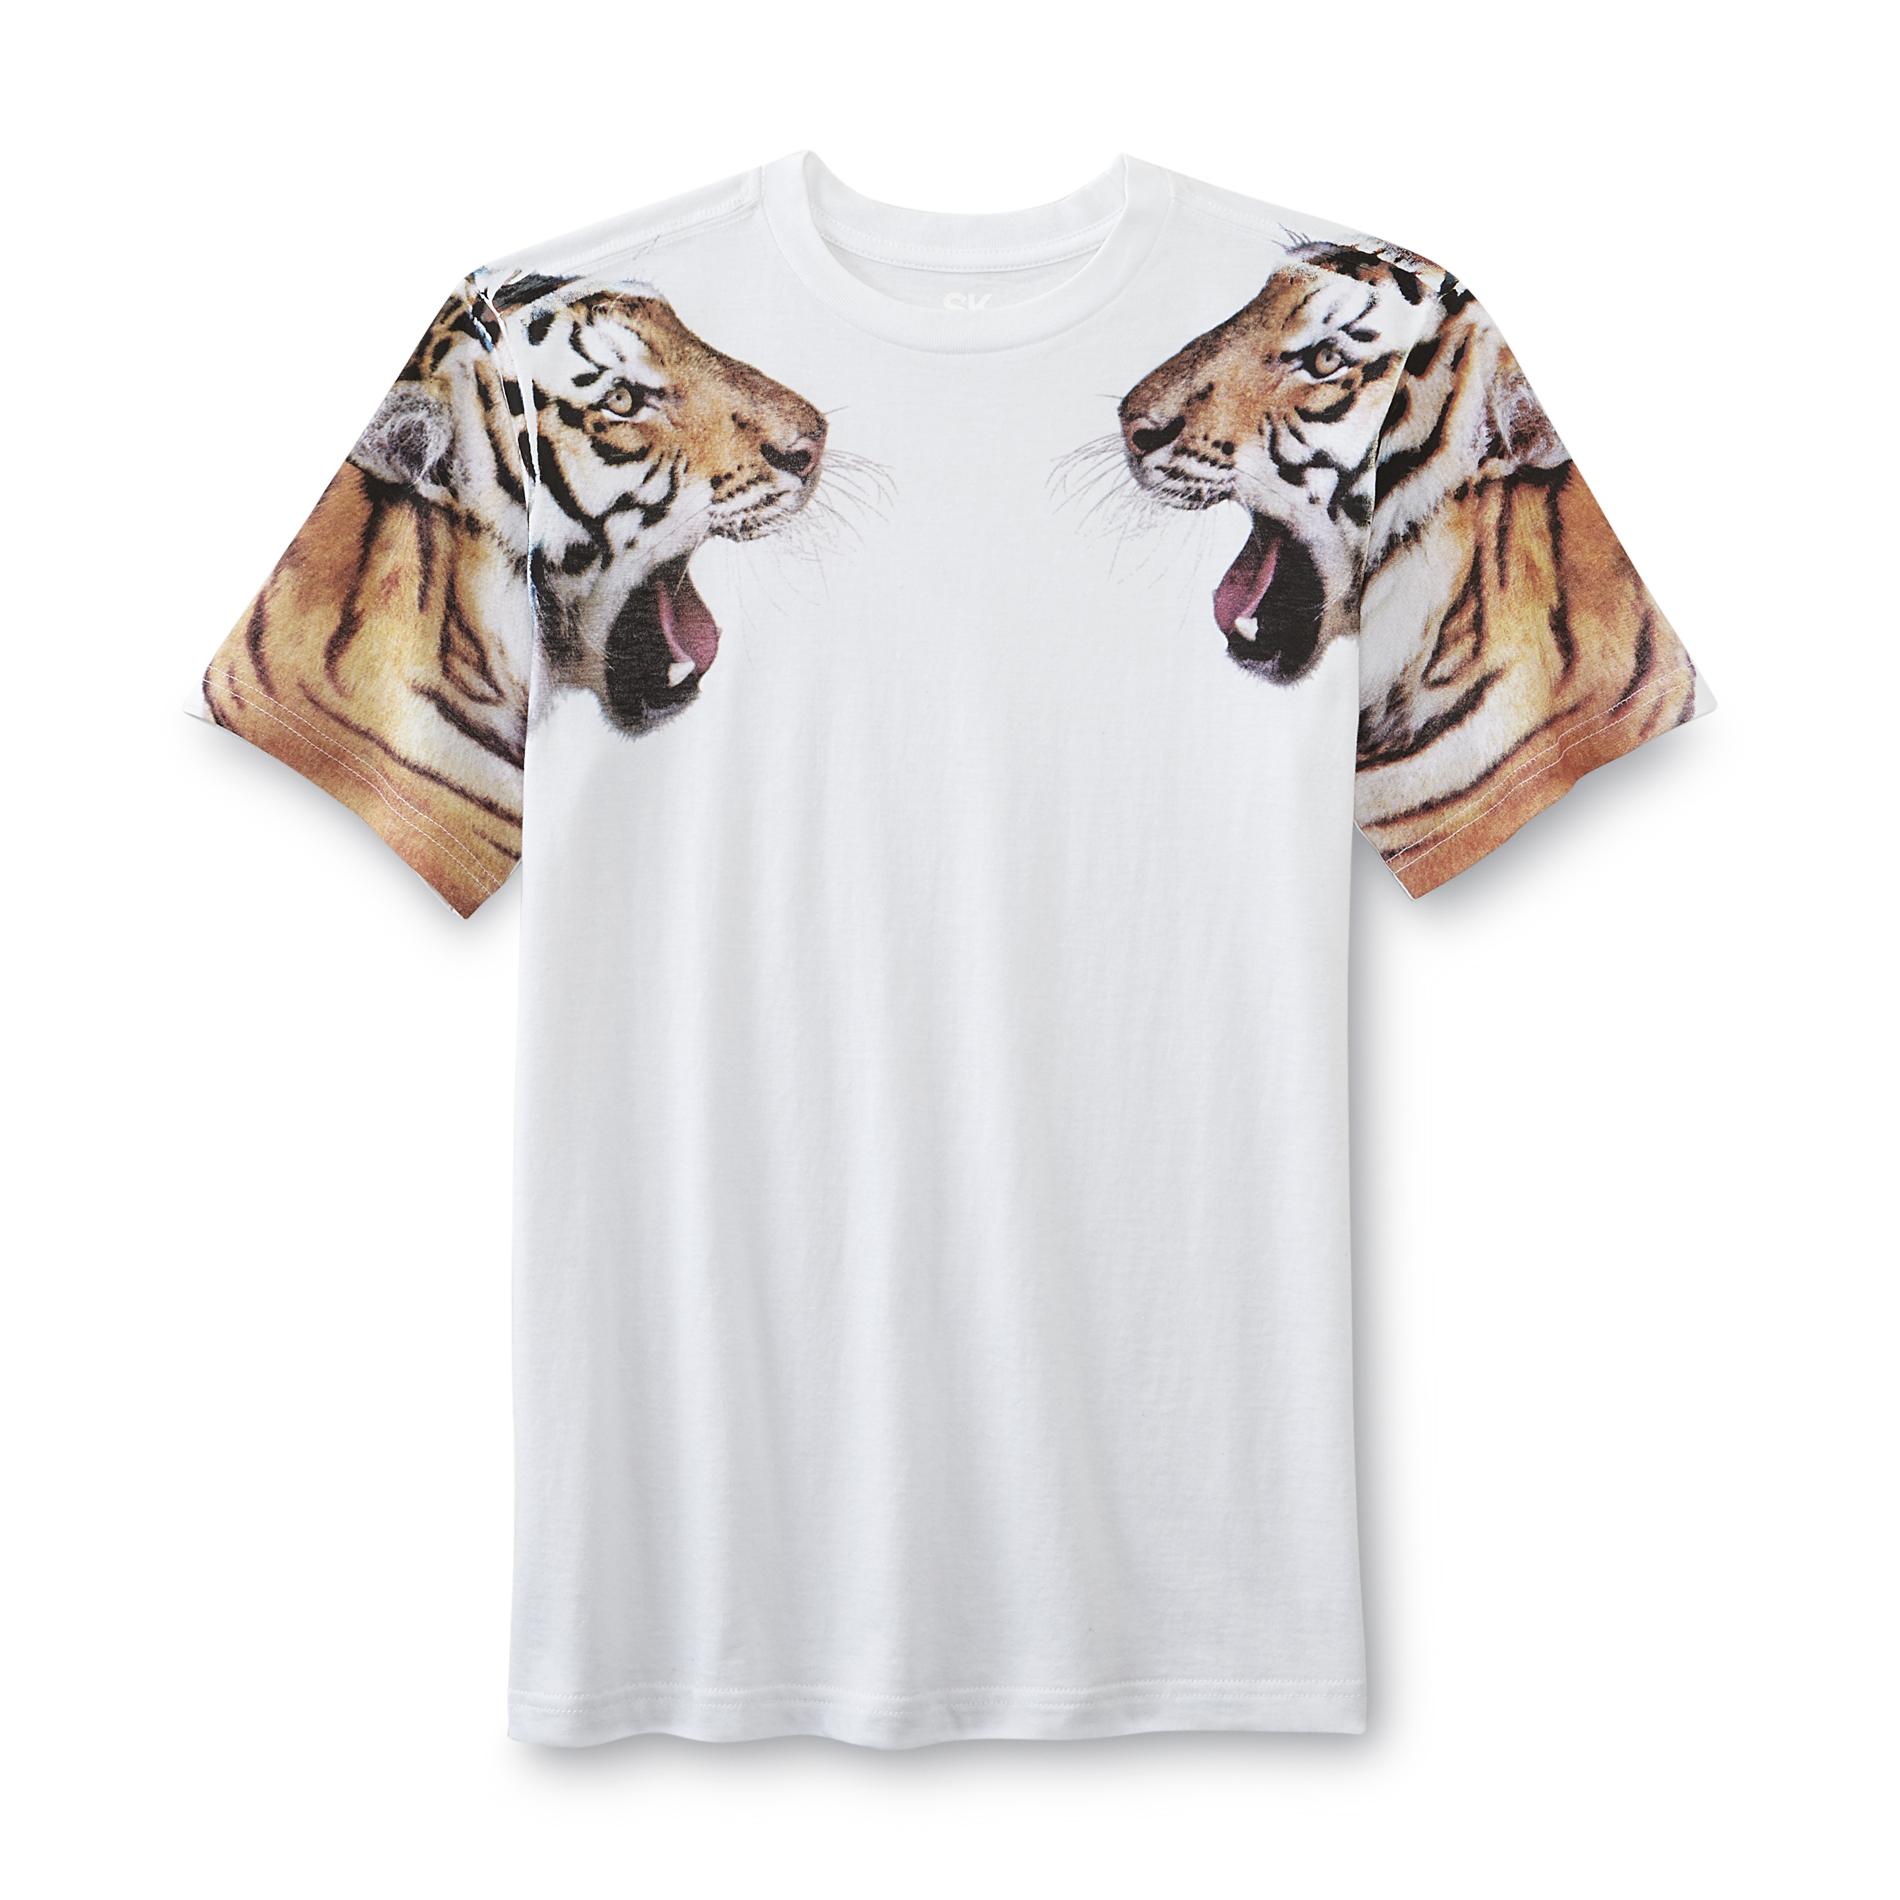 SK2 Boy's Graphic T-Shirt - Twin Tigers